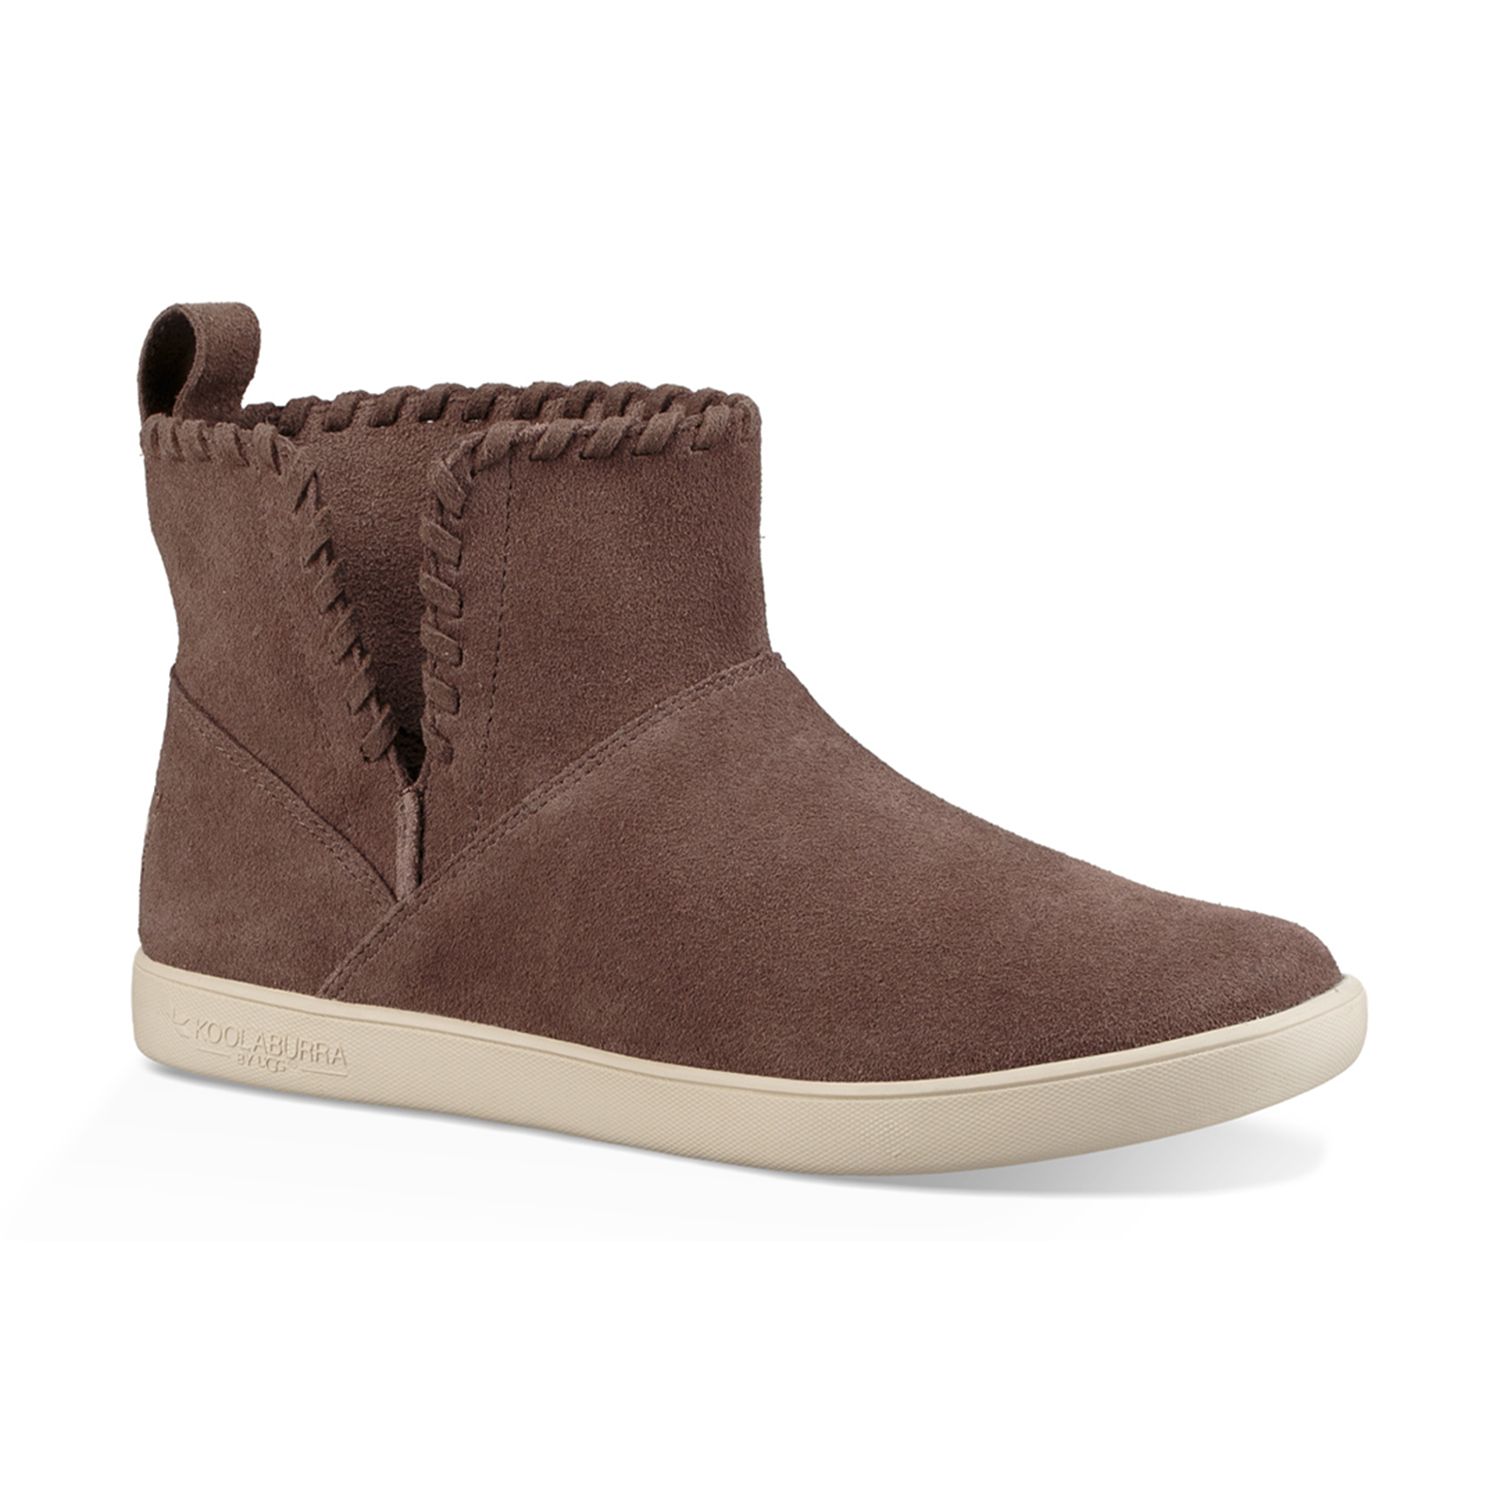 Koolaburra by UGG Rylee Women's Ankle Boots